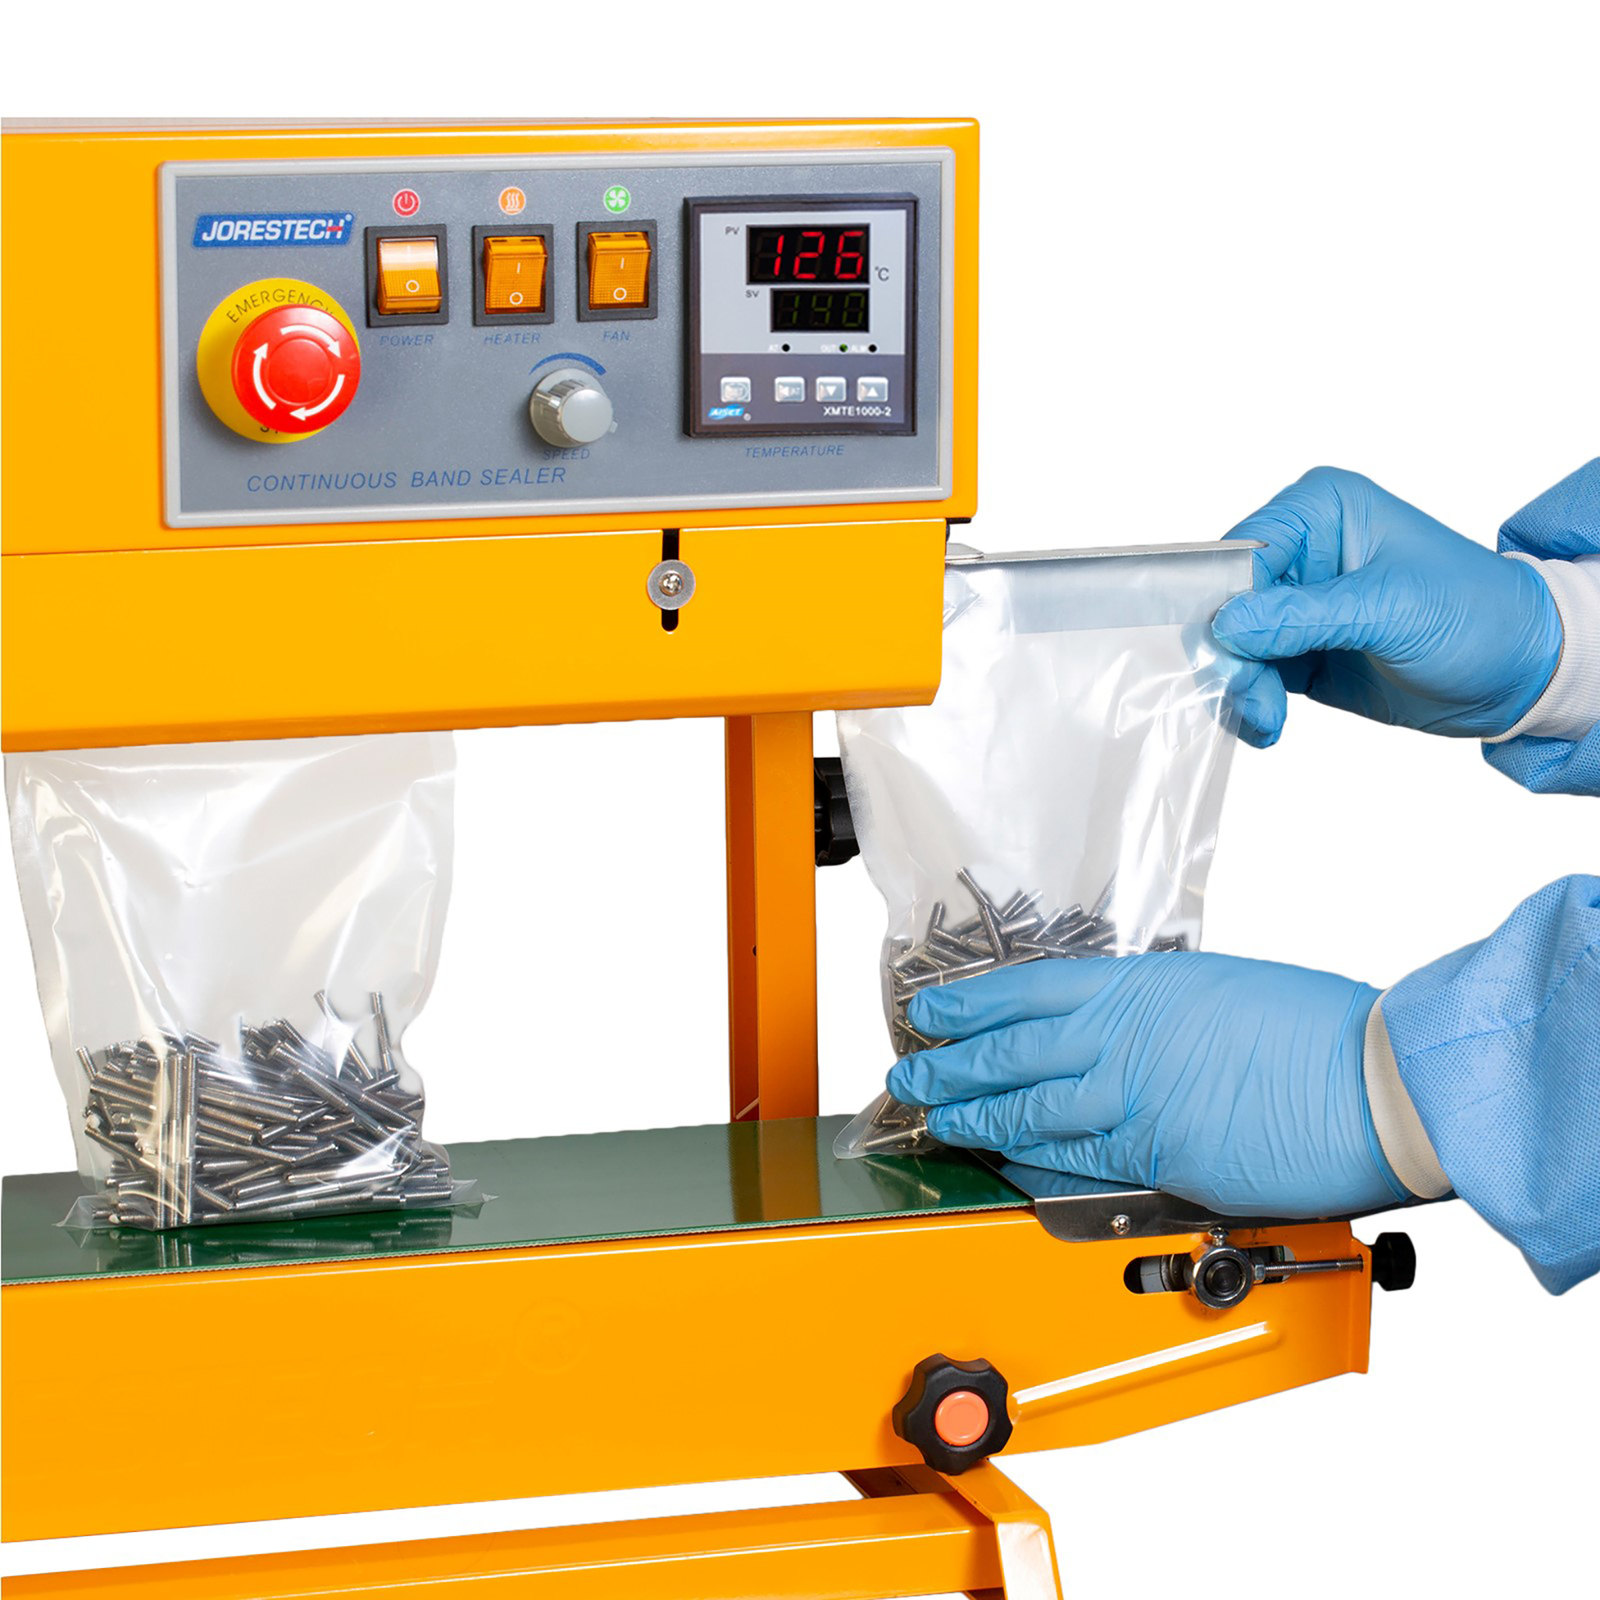 An operator wearing blue gloves and disposable clothing inserting plastic bags filled with nails into the yellow JORES TECHNOLOGIES® continuous band sealer. The bag sealer positioned for vertical applications